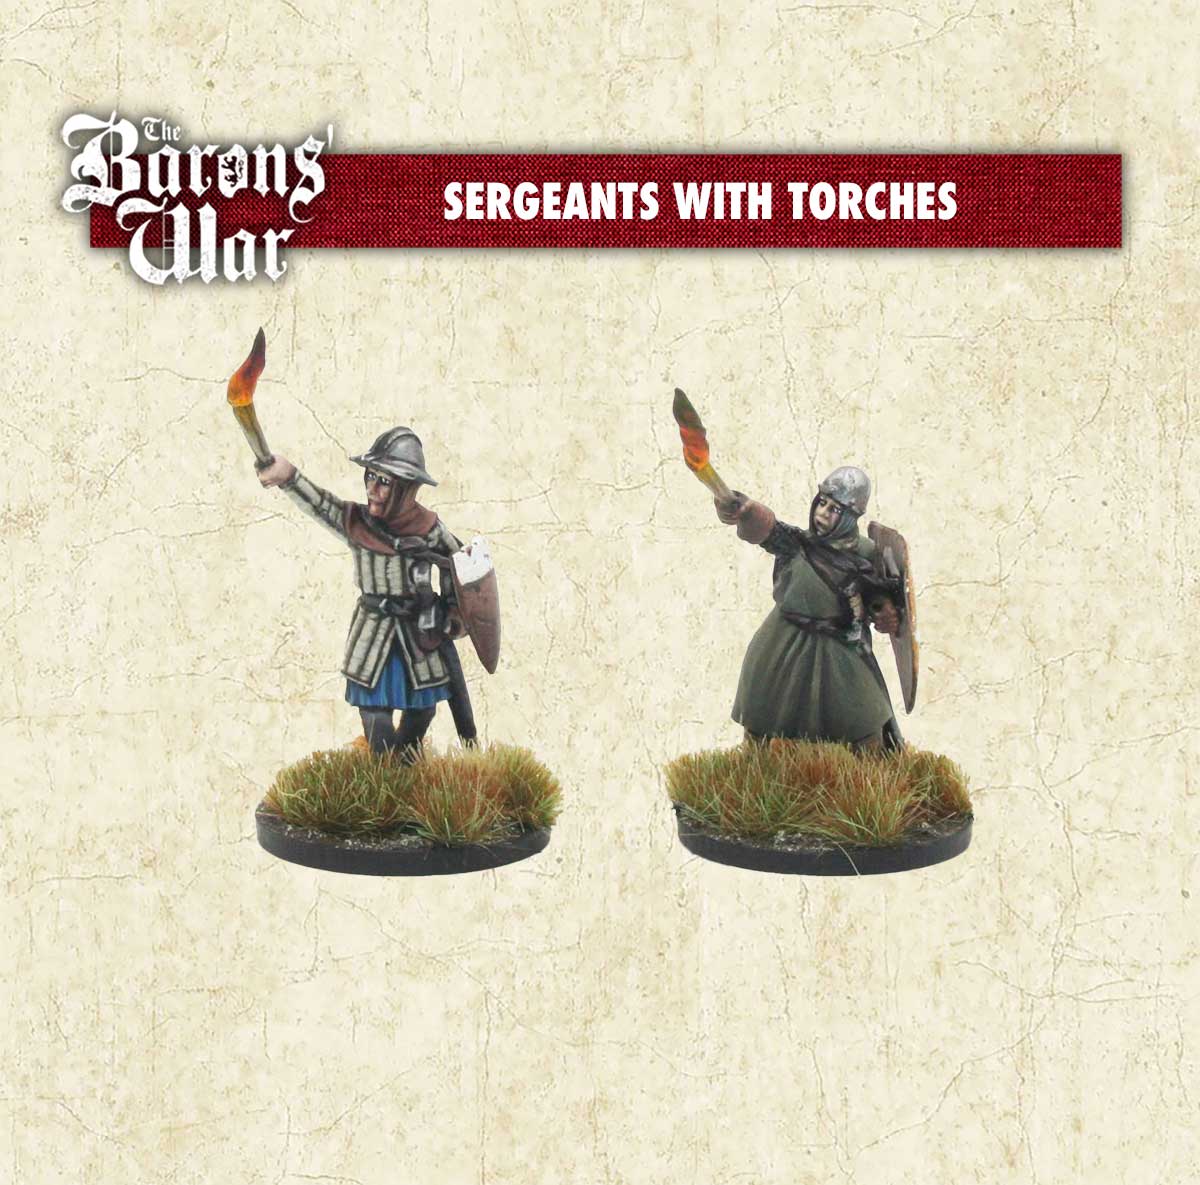 Baron's War Sergeants with torches 28mm historical miniatures